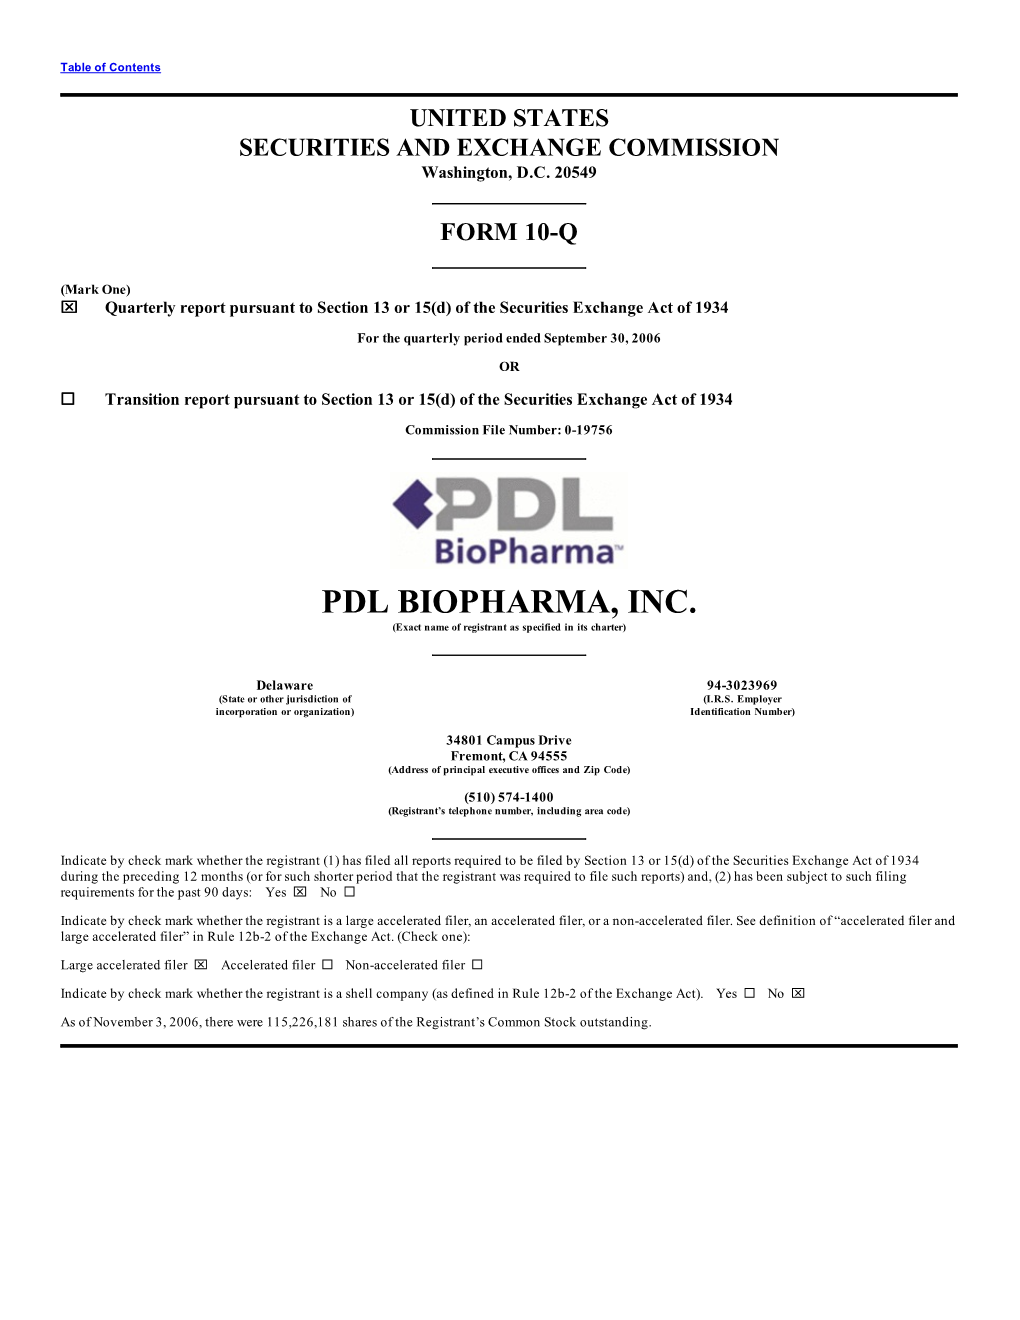 PDL BIOPHARMA, INC. (Exact Name of Registrant As Specified in Its Charter)